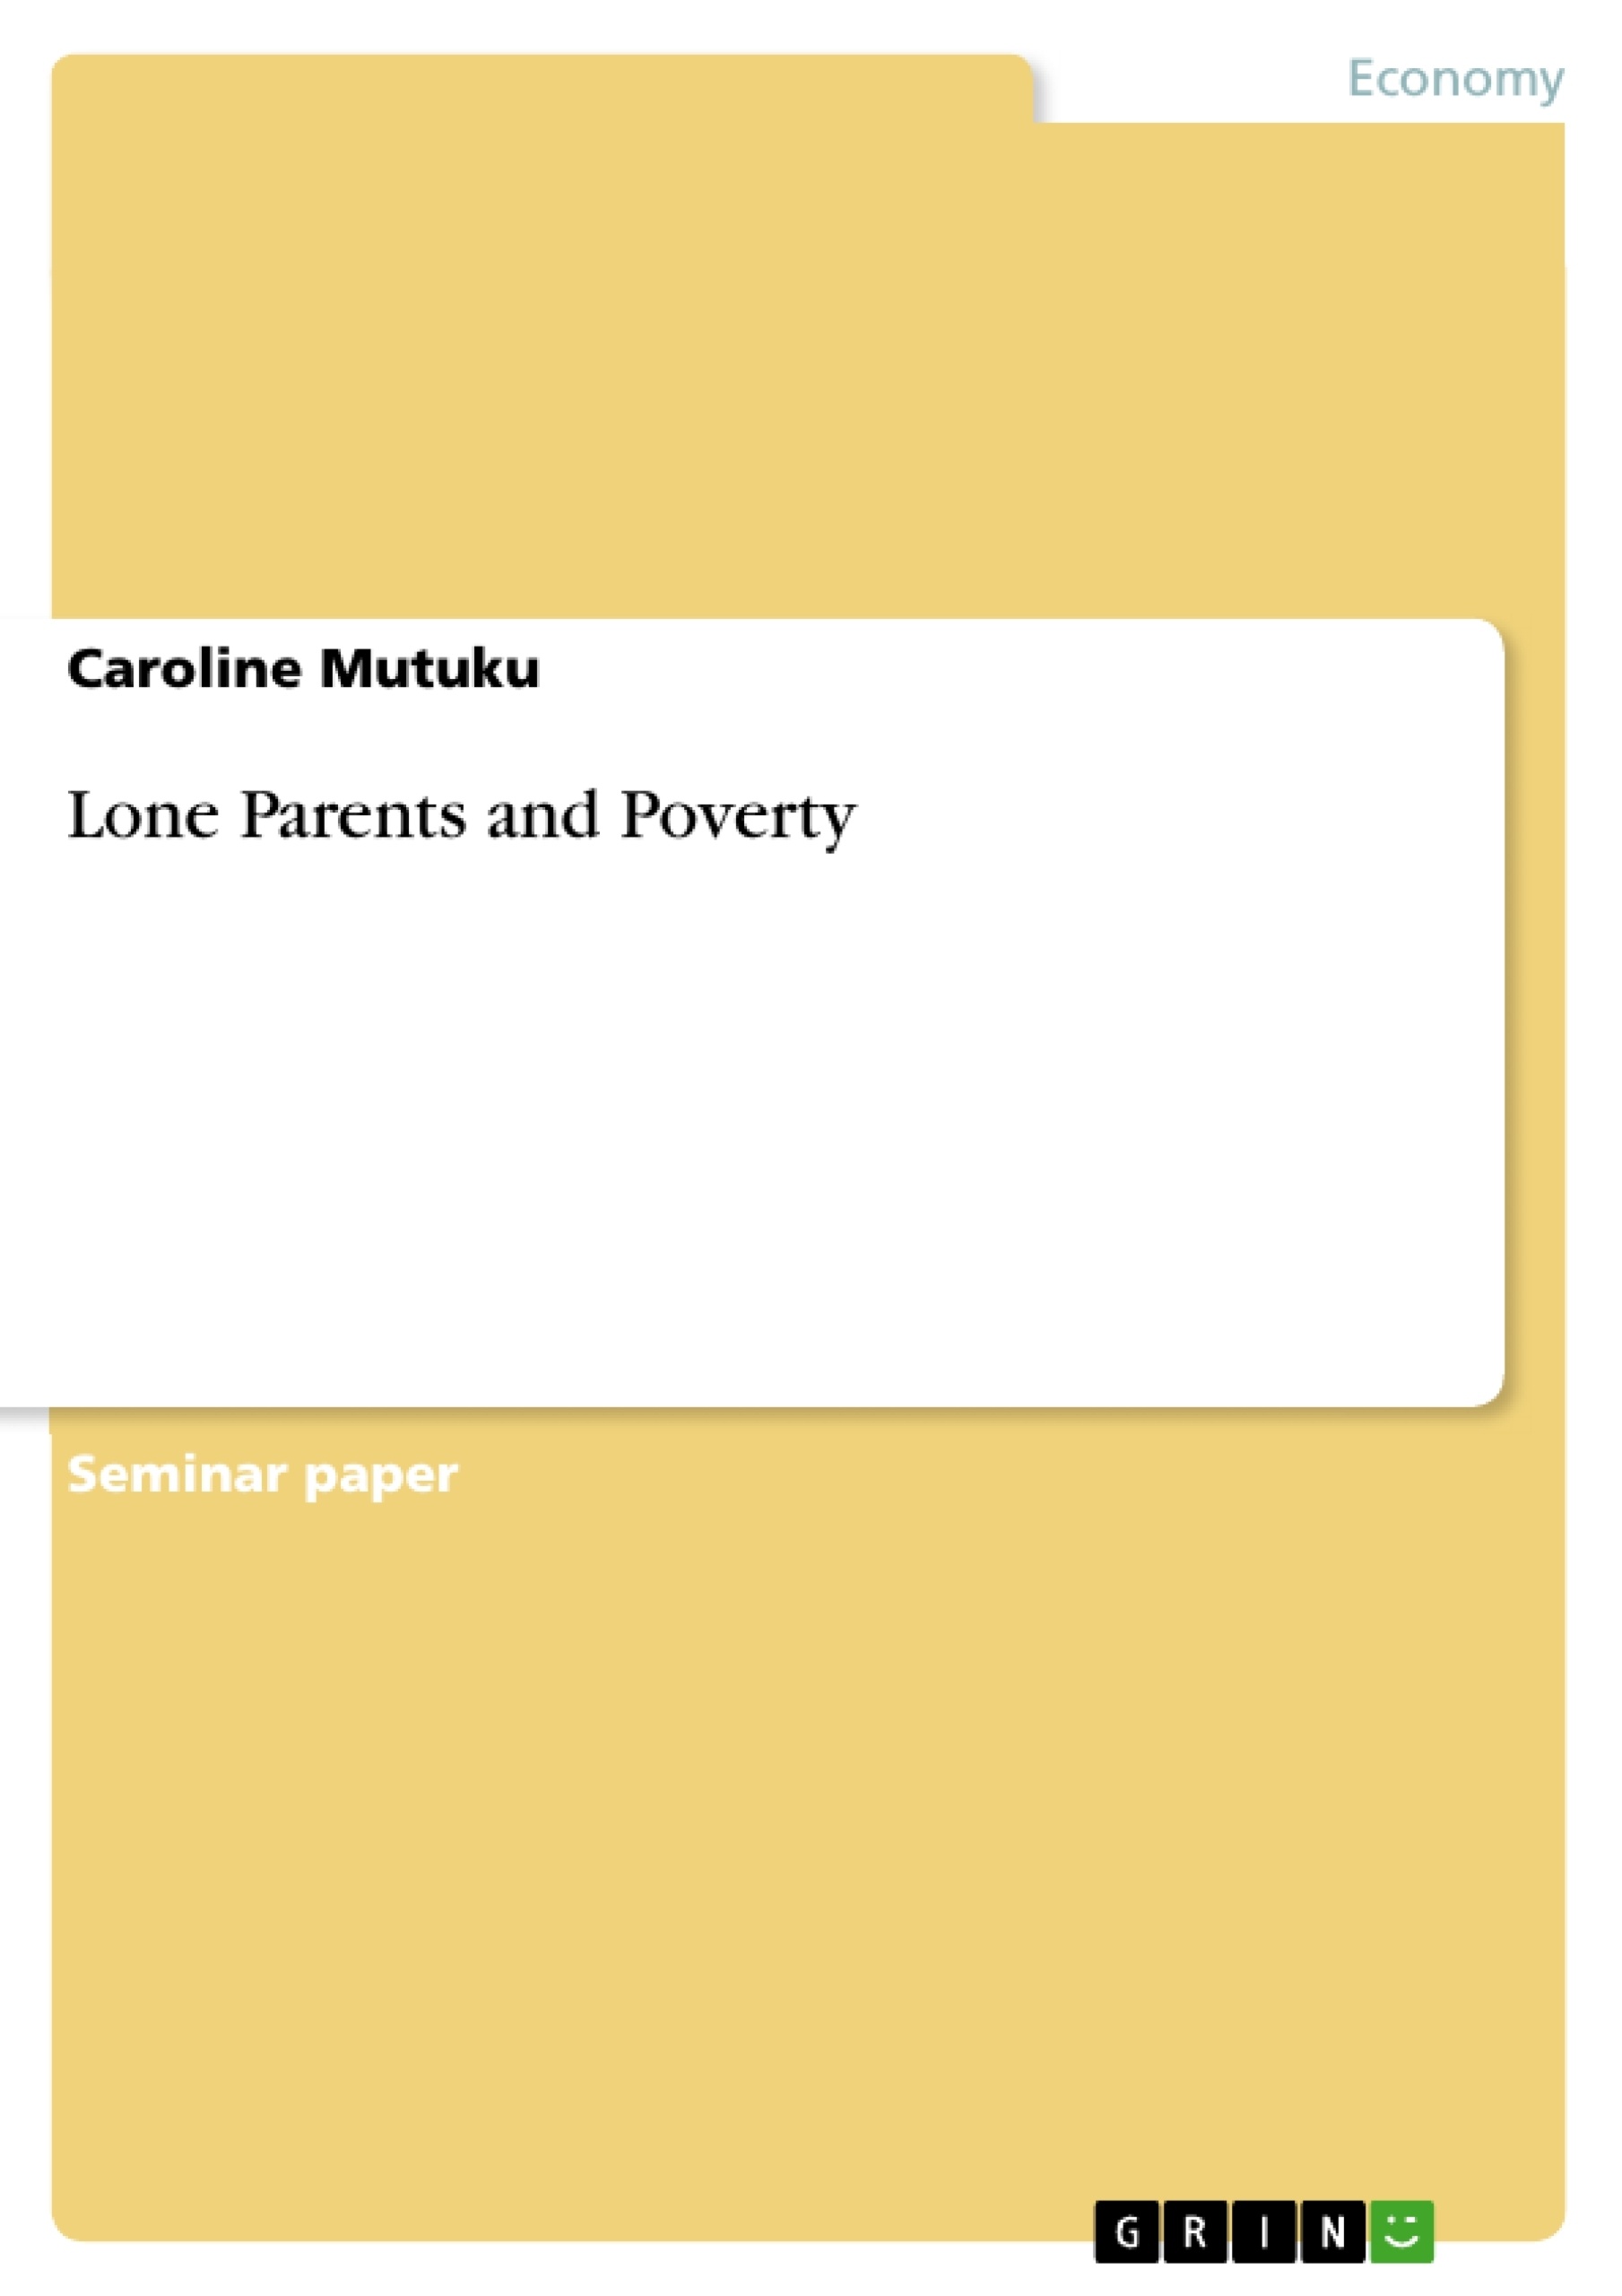 Title: Lone Parents and Poverty